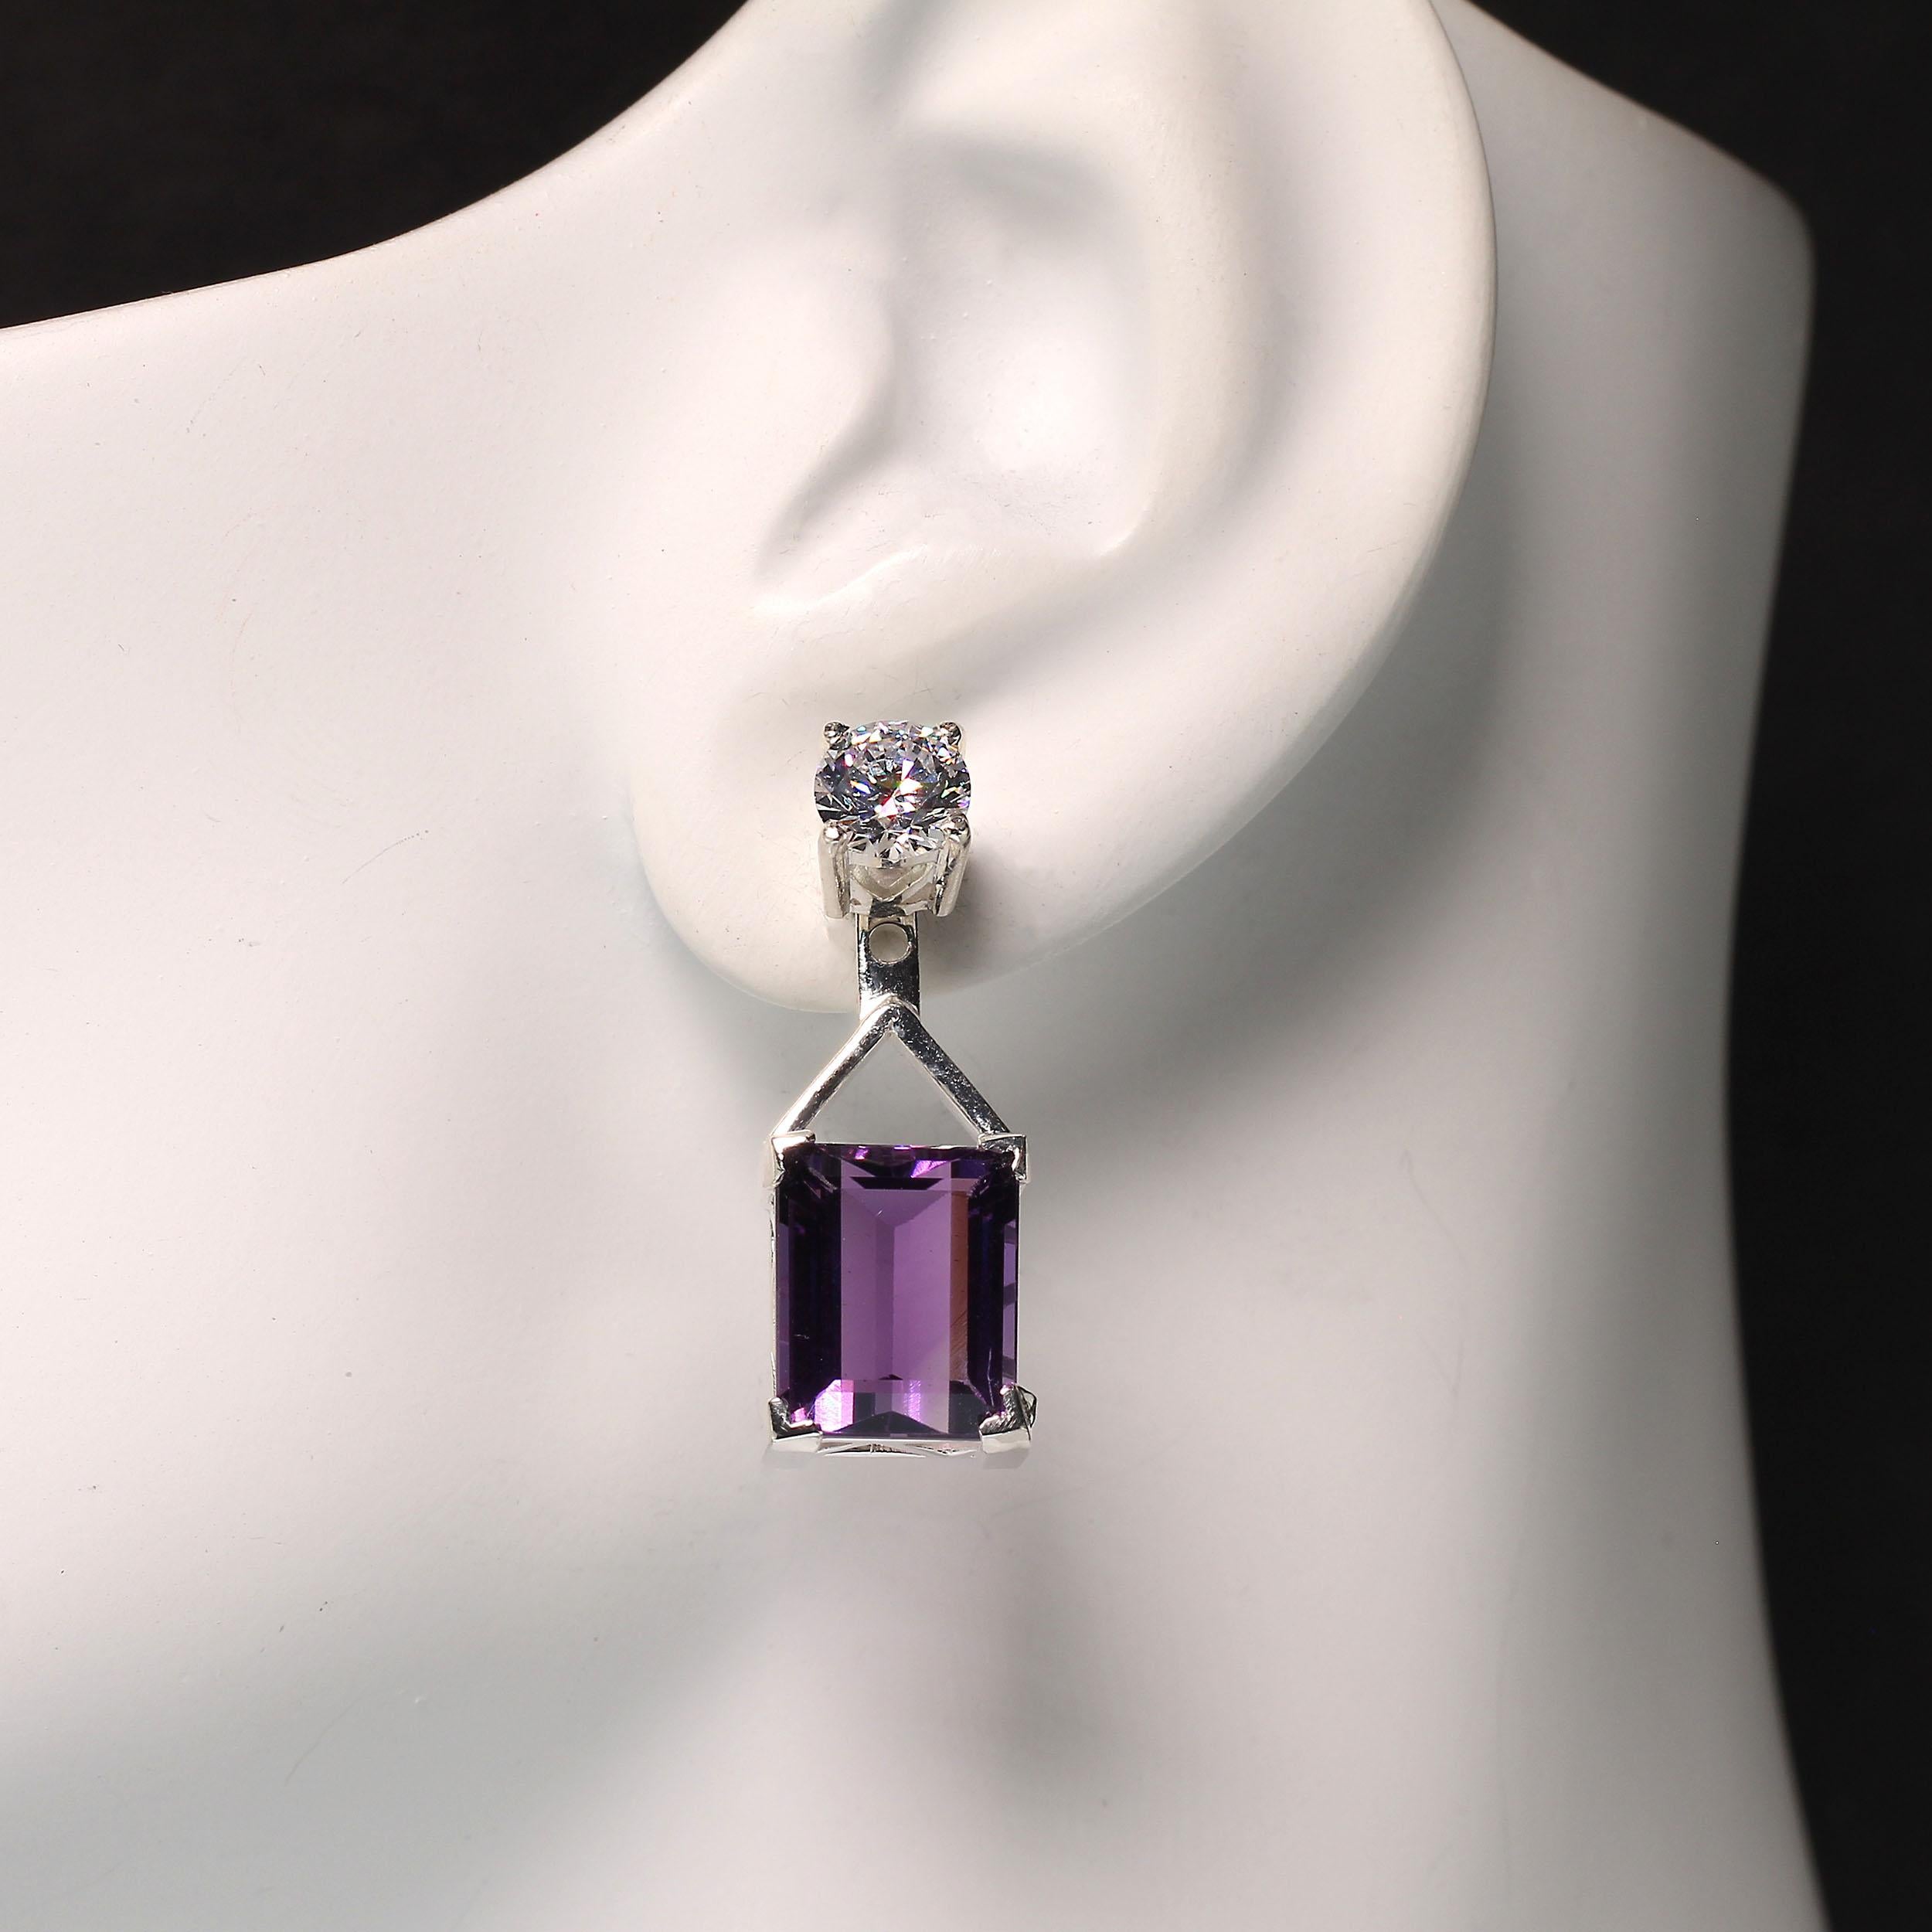 Hand made Sterling Silver baskets hold emerald cut Amethysts dangling from sparkling round Cambodian Zircons. These elegant earrings are perfect for day into evening wear. You can also wear only the scintilating Cambodian Zircon stud when you